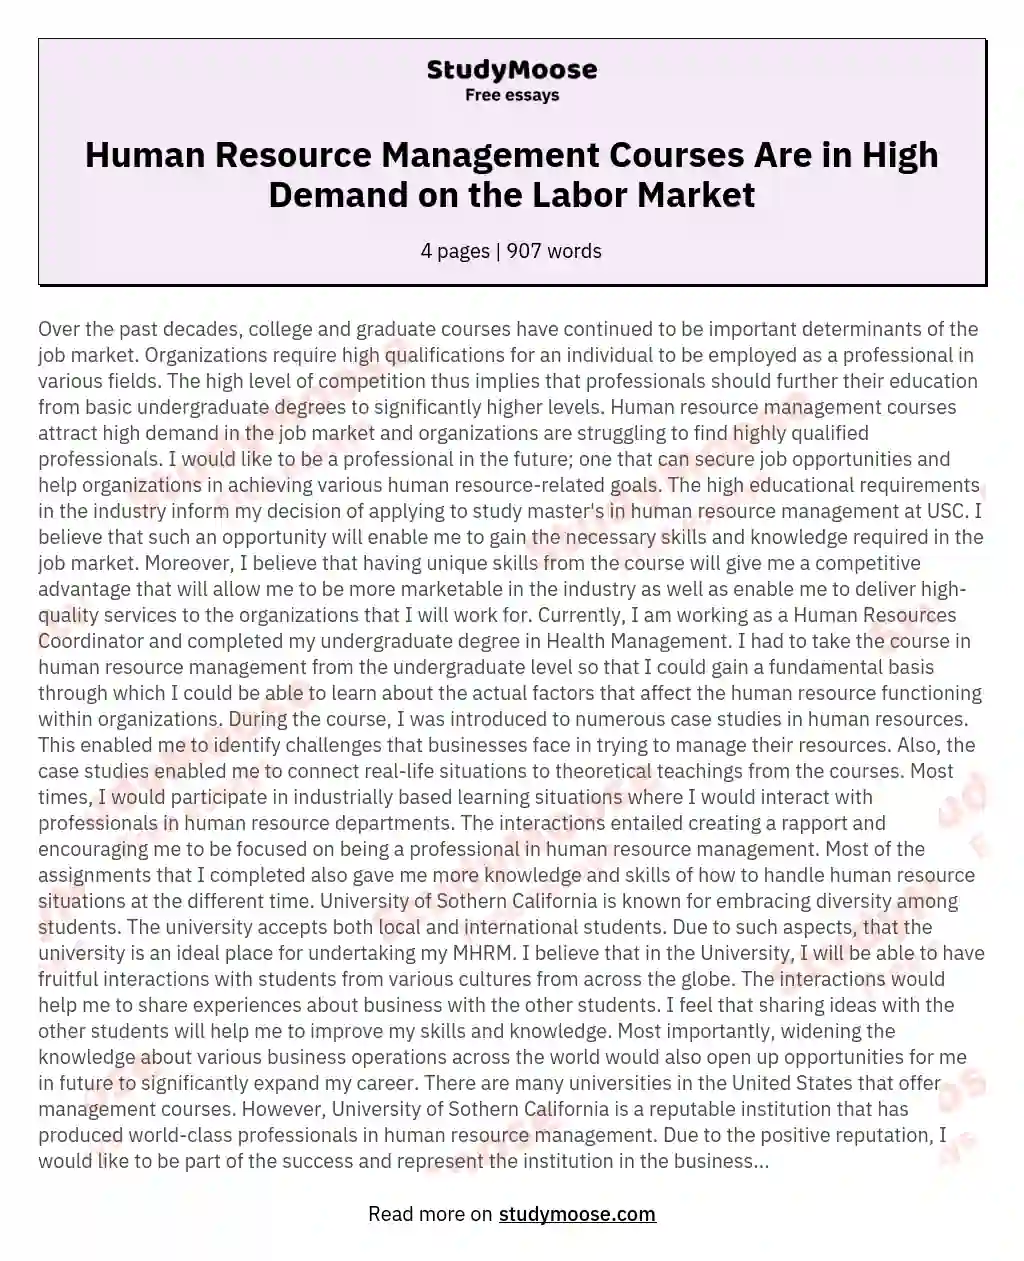 Human Resource Management Courses Are in High Demand on the Labor Market essay